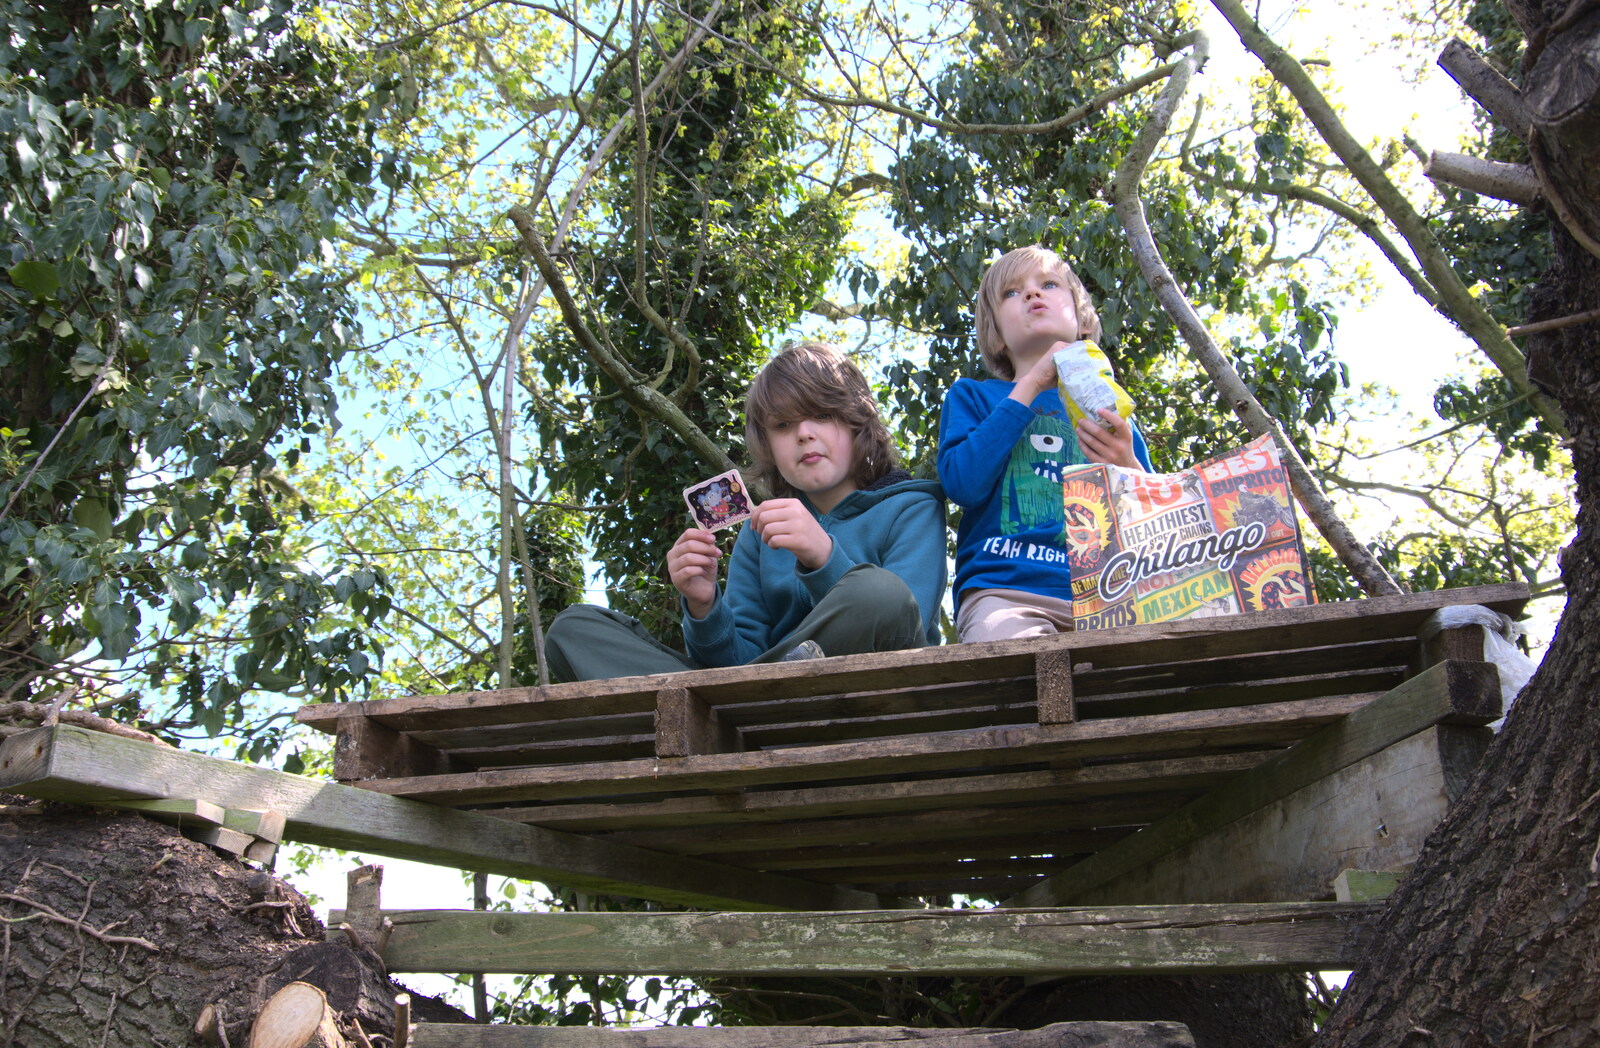 The boys have a picnic up a tree from A Weekend Camping Trip in the Garden, Brome, Suffolk - 11th April 2020